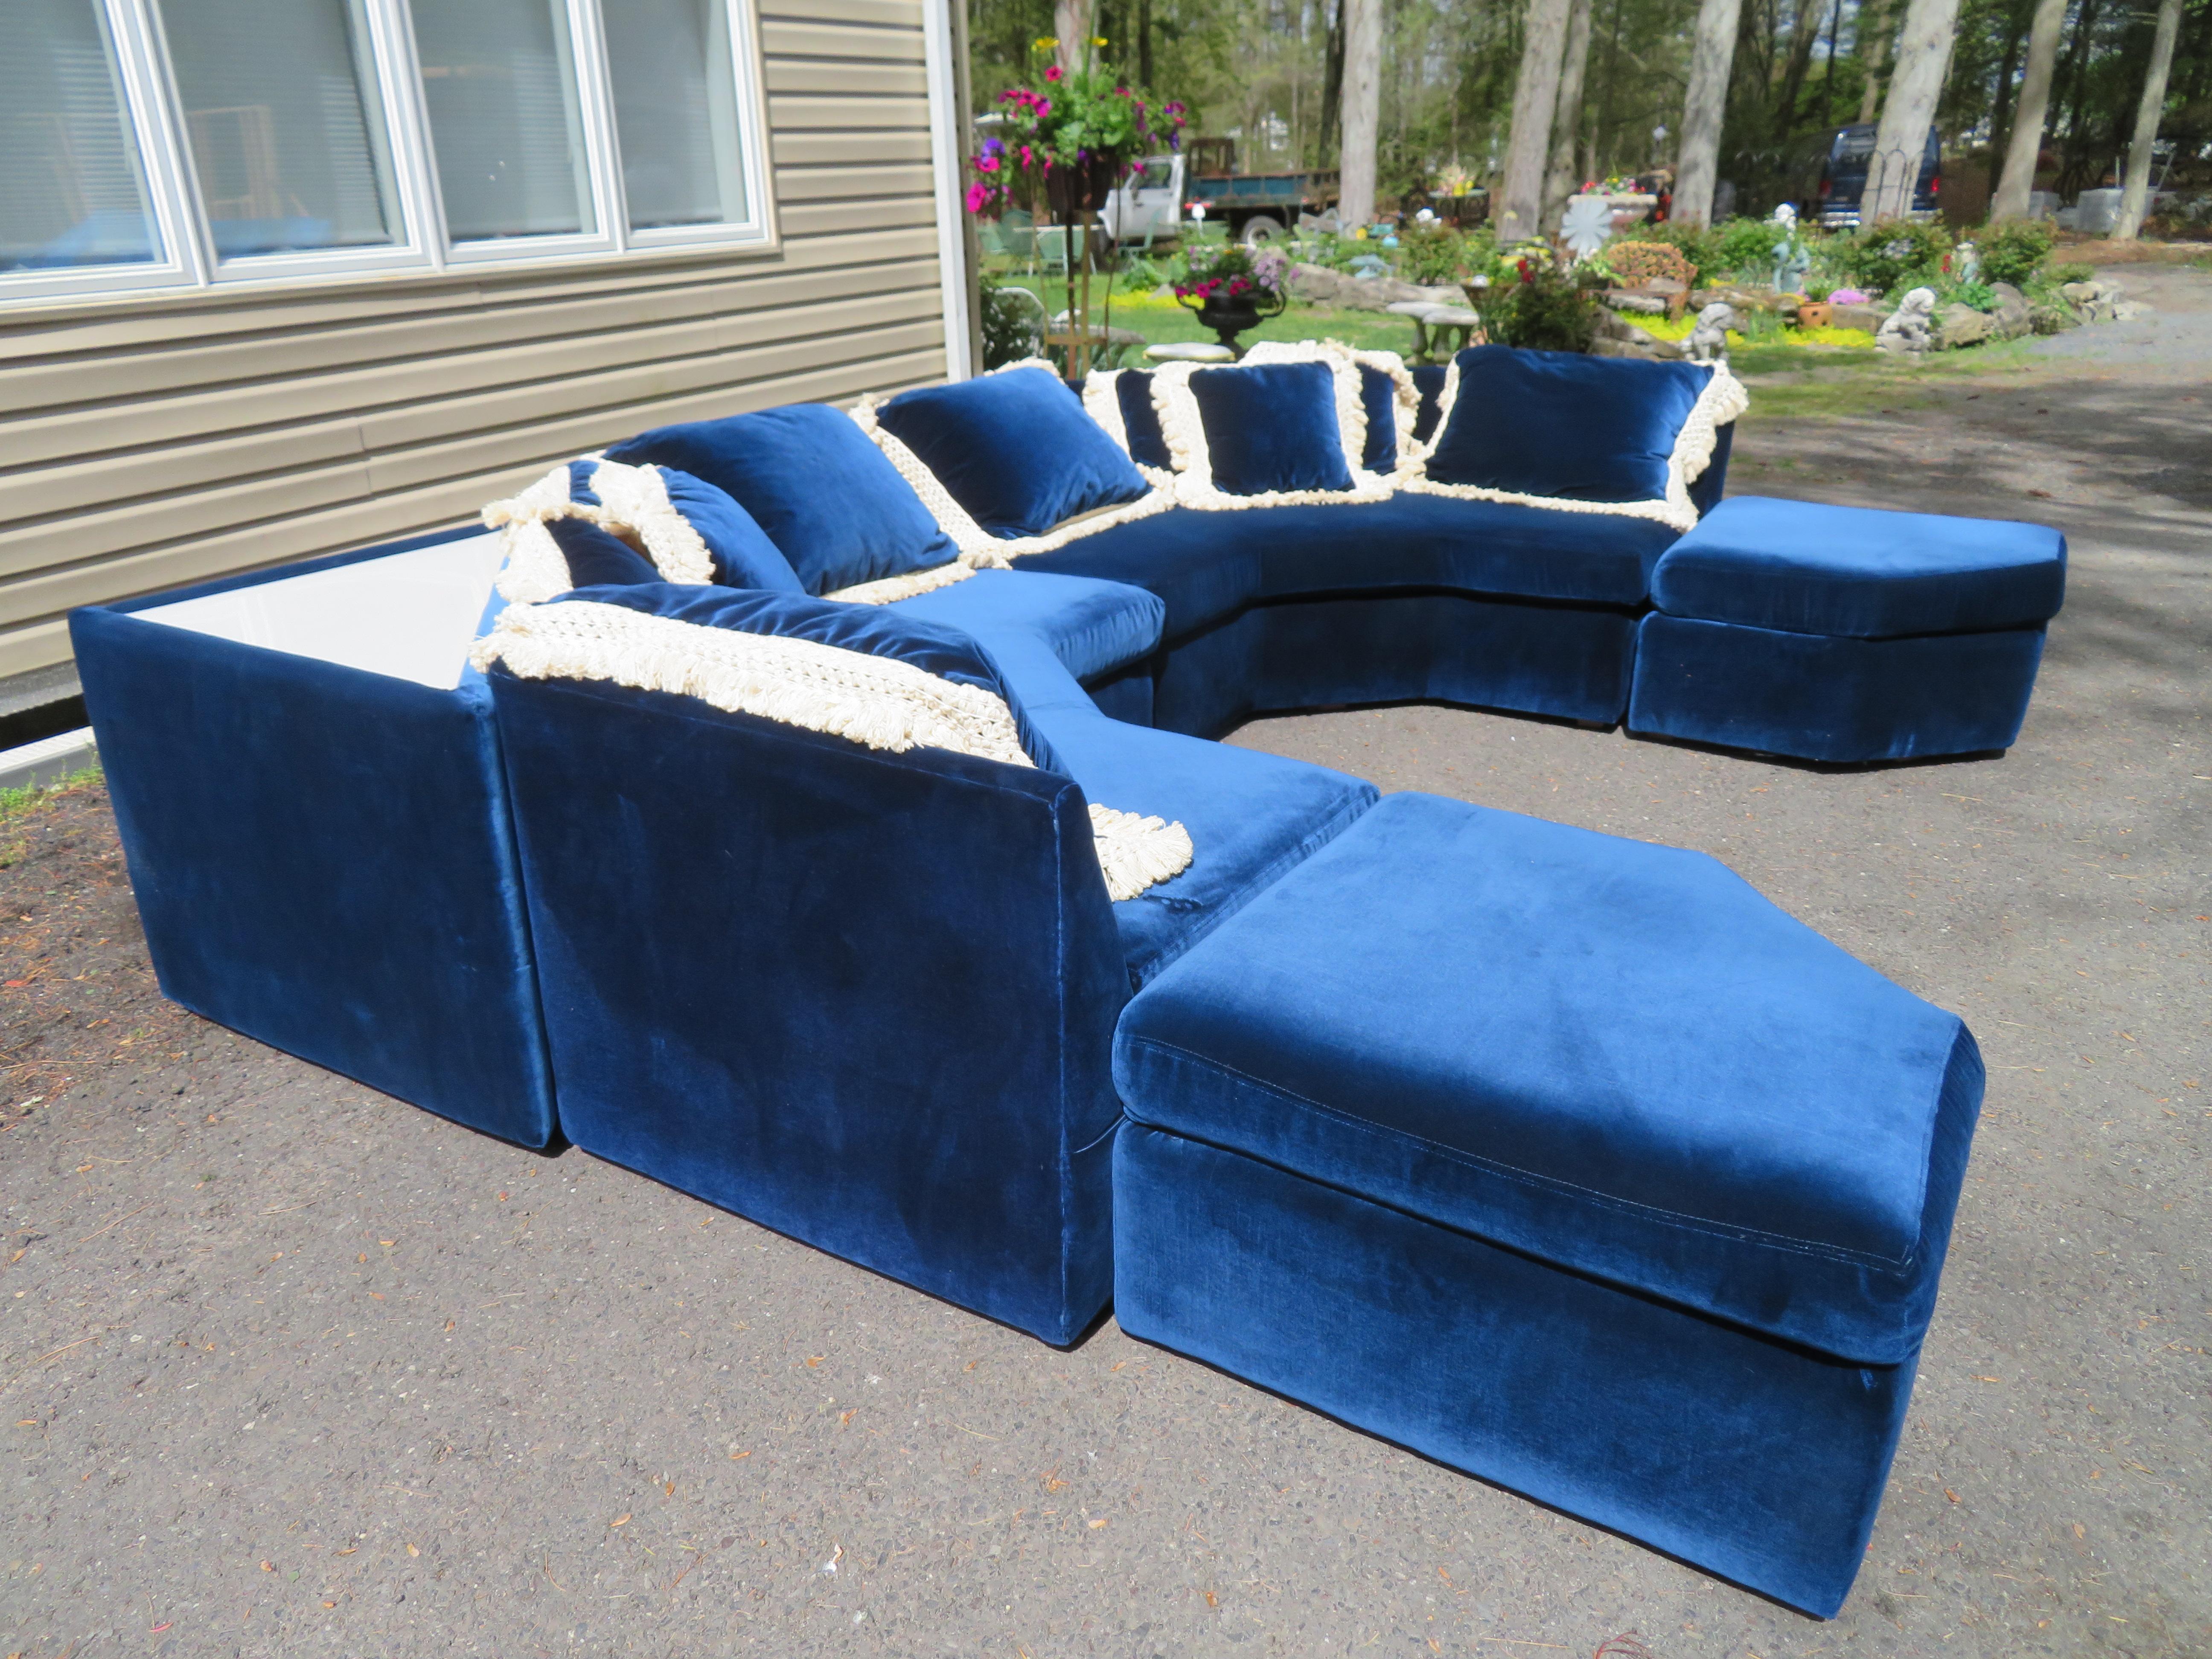 Fantastic deep blue velvet 2 piece angled sofa with 2 light-up tables and 2 ottomans, so this is a total of 6 pieces. This sofa sectional was made By Carsons and is the style of Milo Baughman. The triangular tables light up and look amazing with the